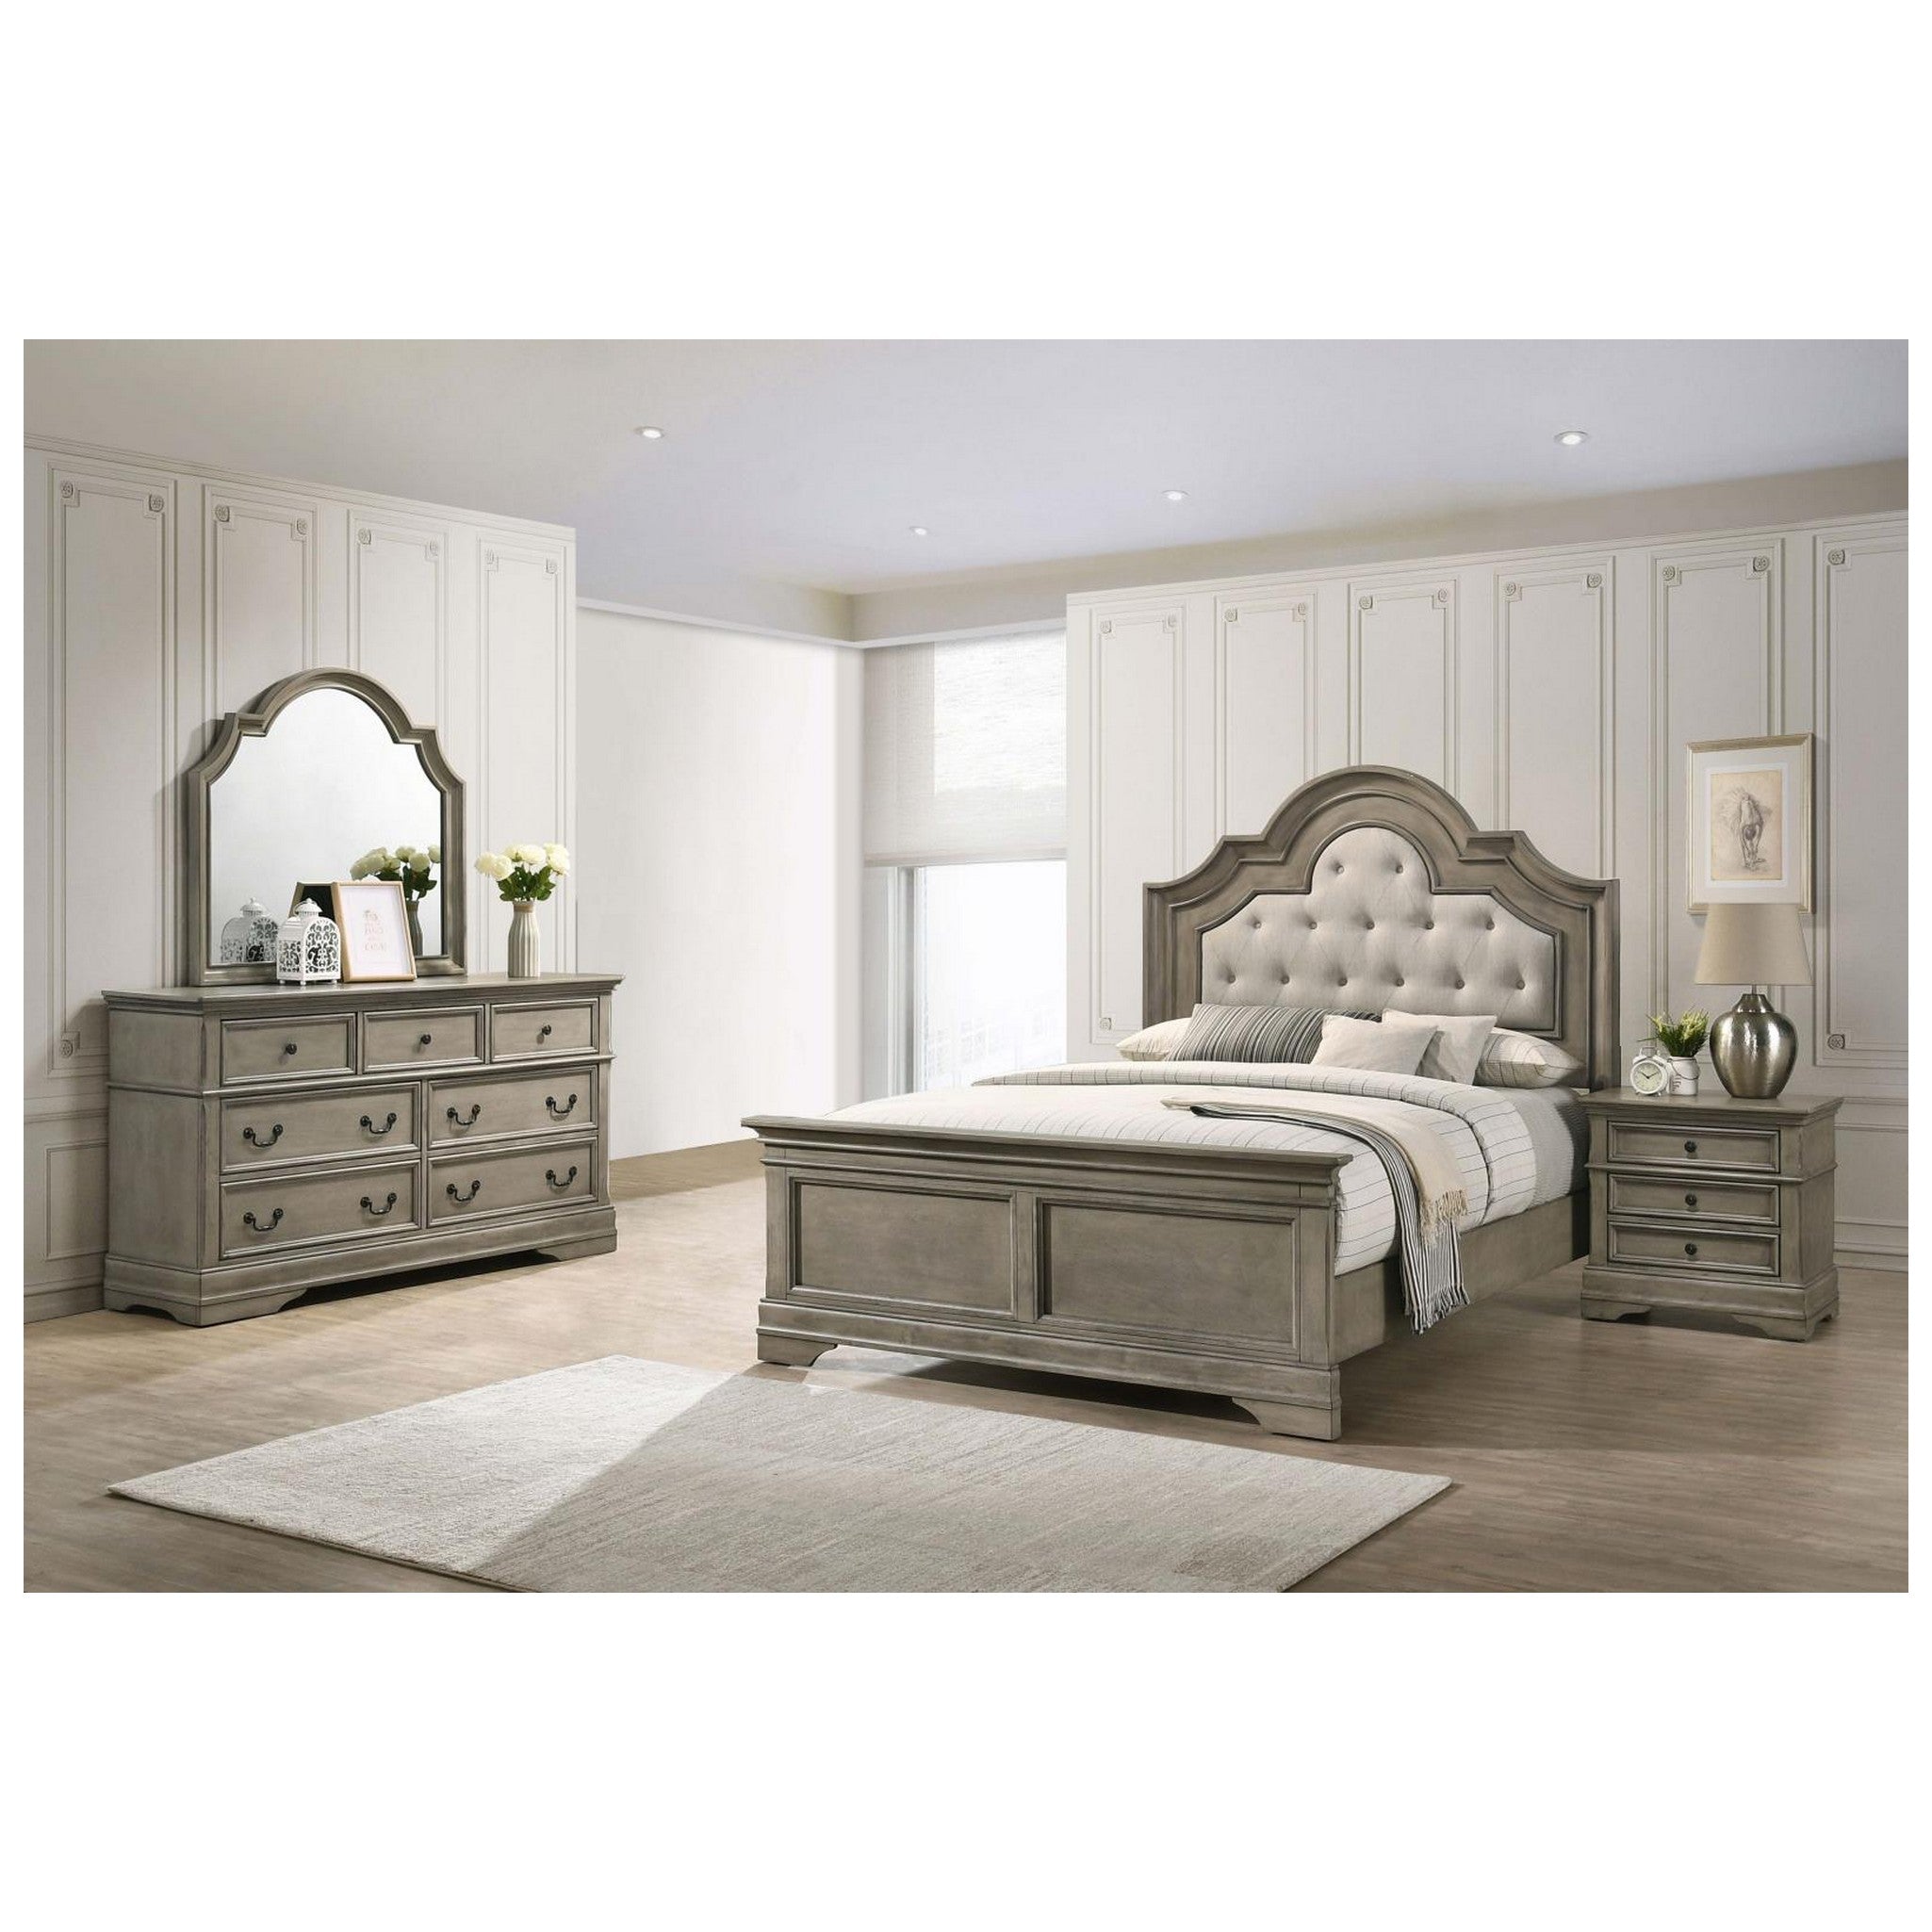 Manchester Bedroom Set with Upholstered Arched Headboard Wheat 222891KW-S4